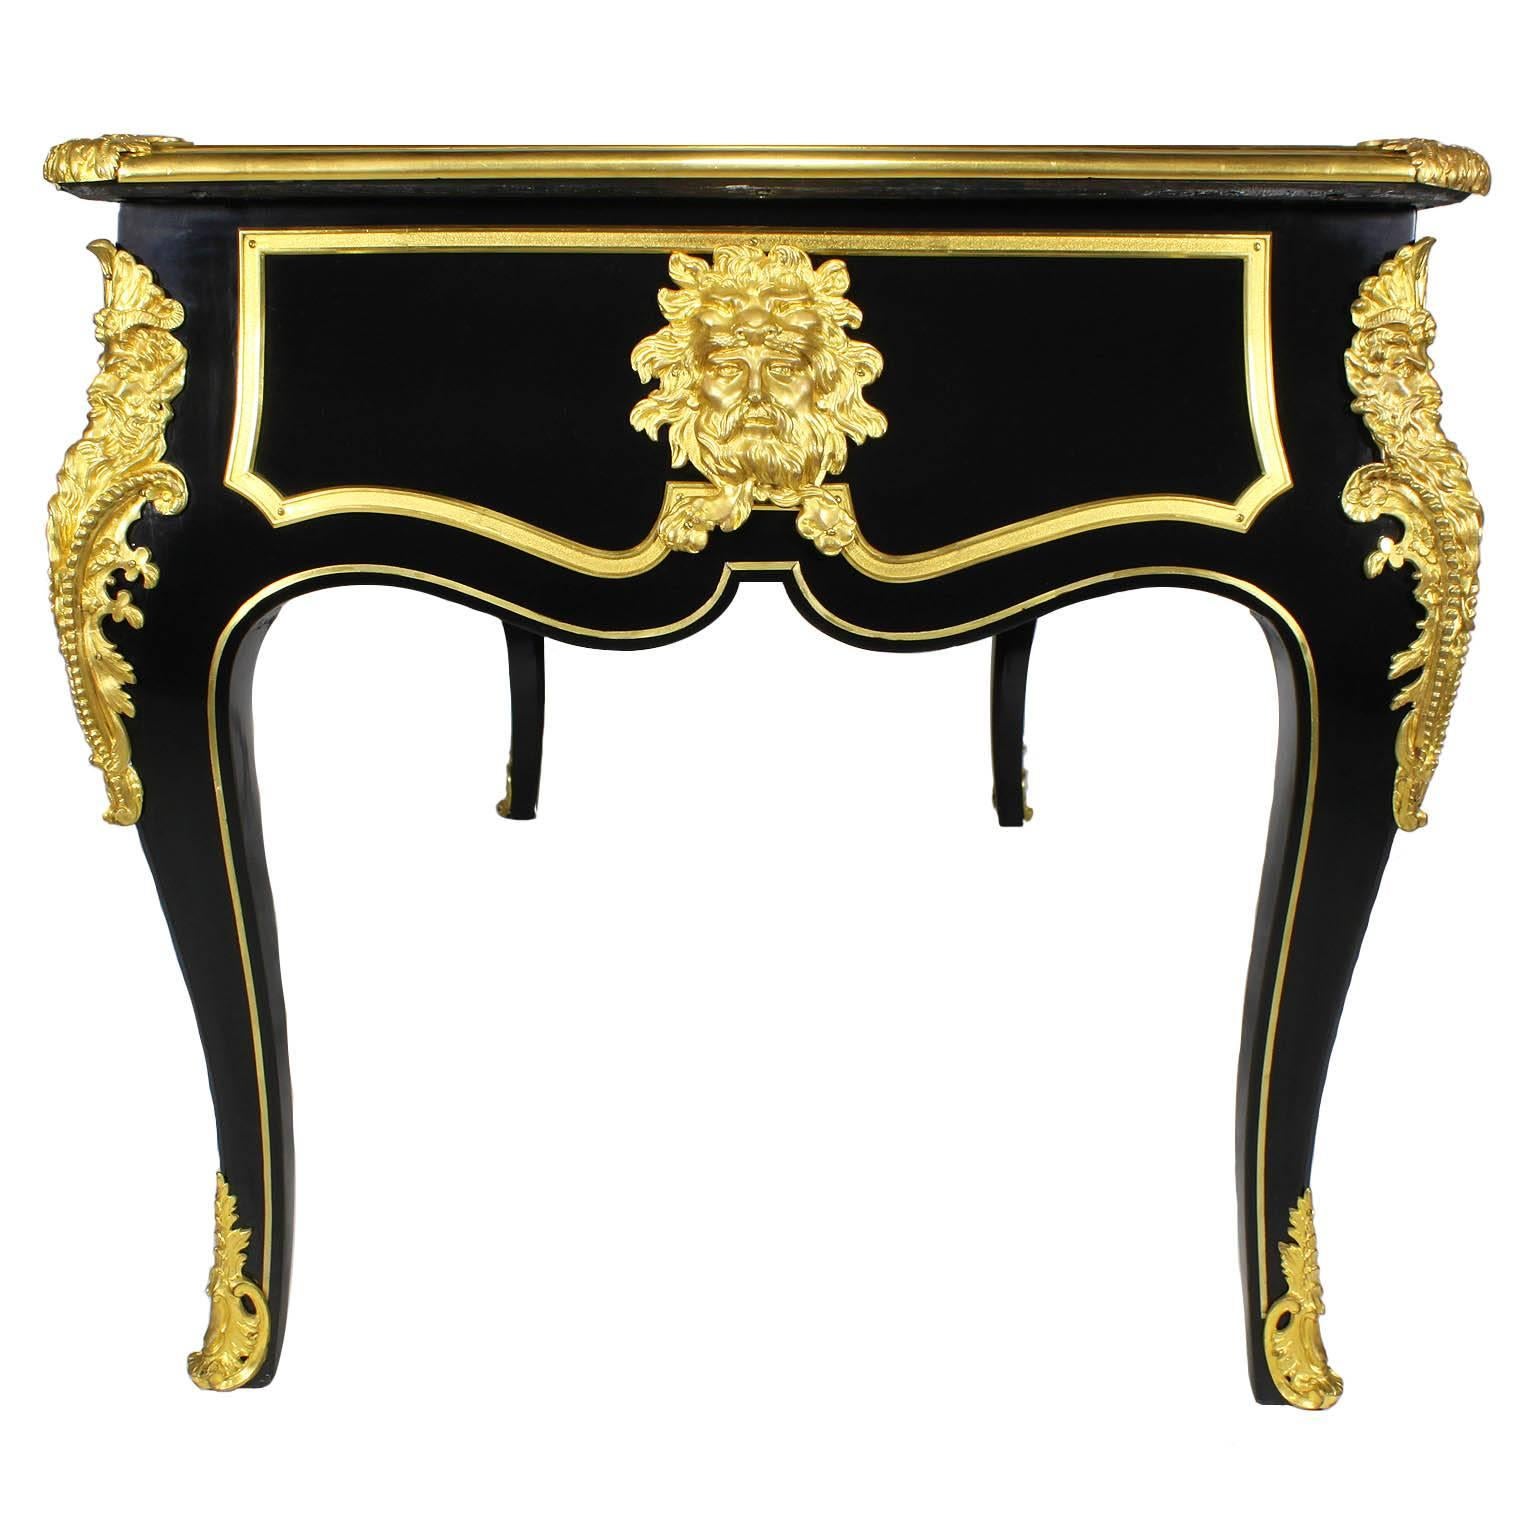 French 19th Century Louis XV Style Ebonized Wood and Gilt Bronze-Mounted Desk For Sale 4